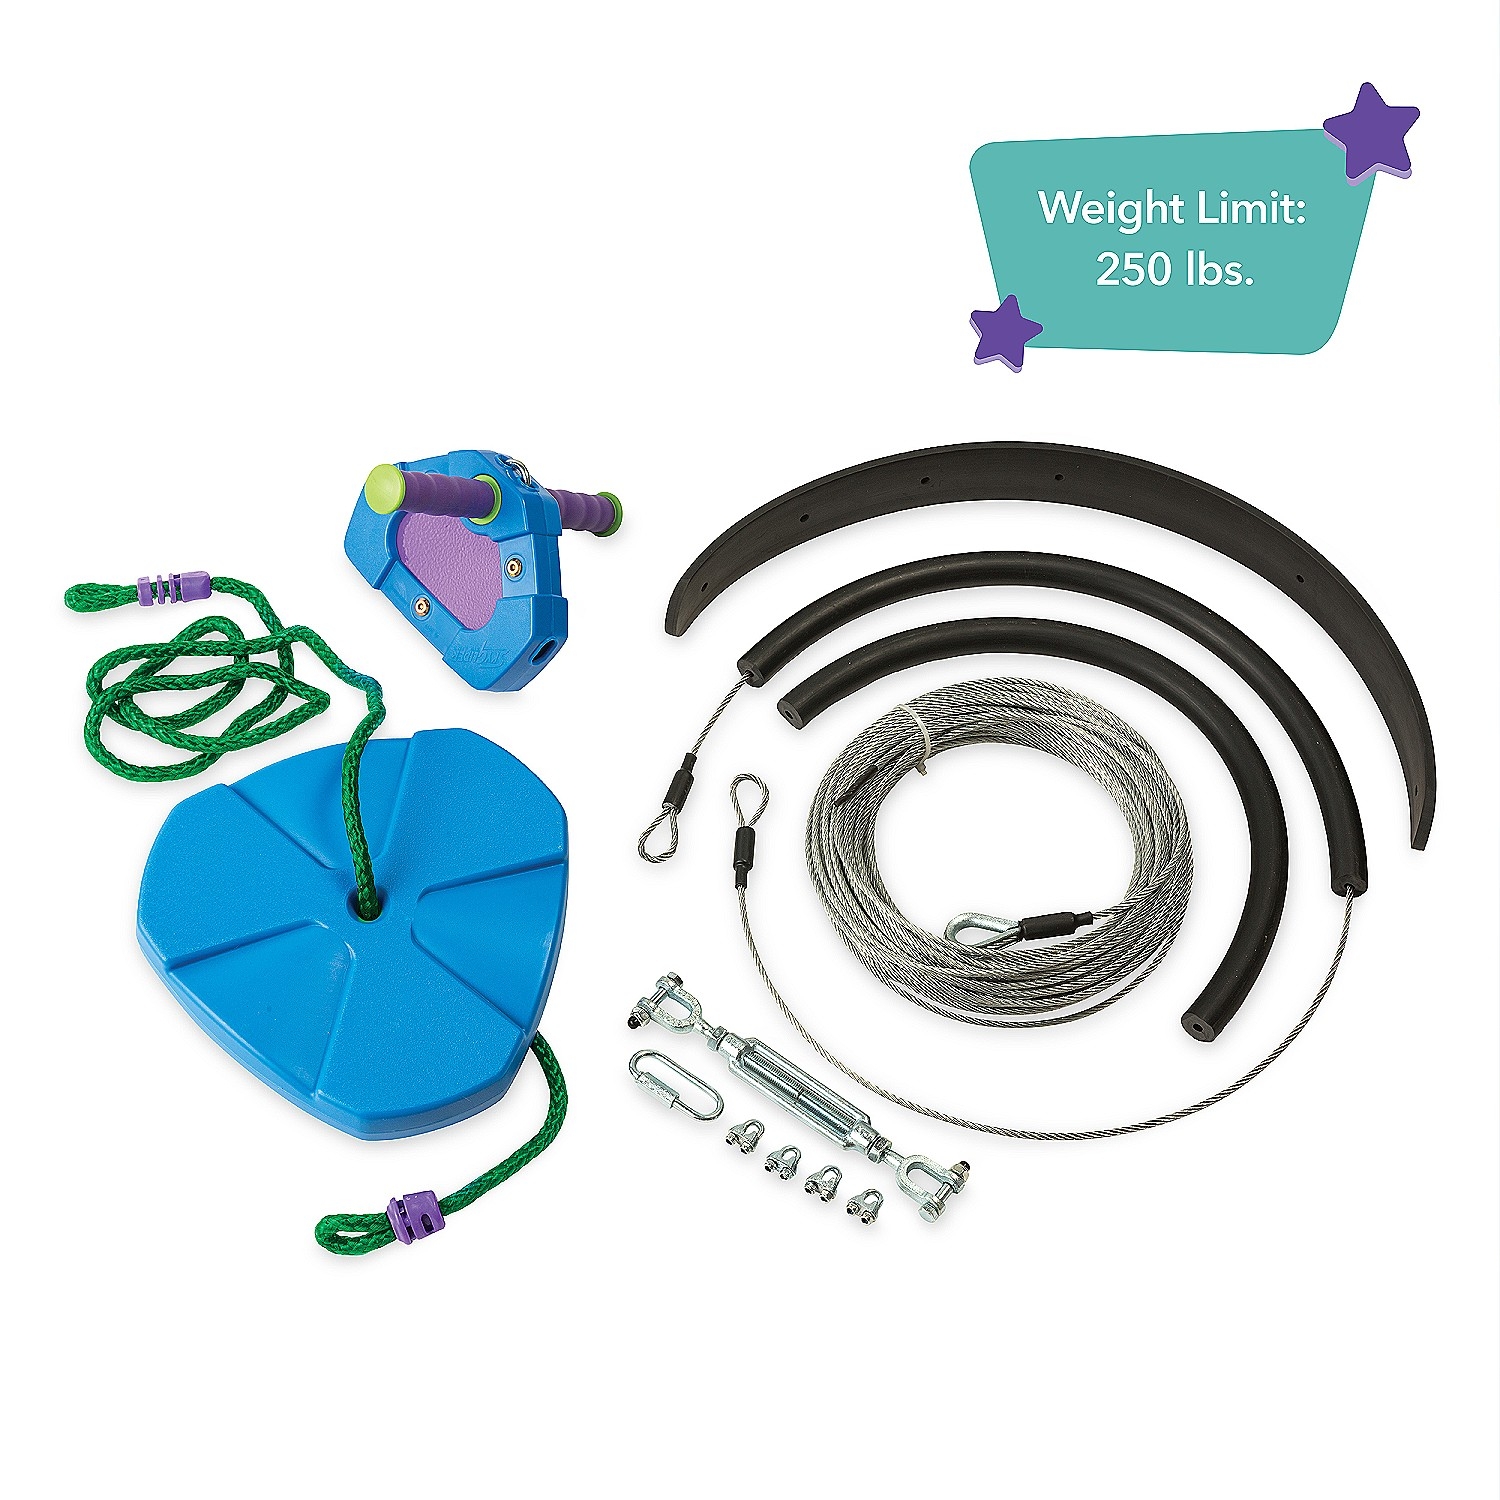 HearthSong 150-Foot Stainless Steel Blue Backyard Zipline Kit with  Adjustable Seat, Non-Slip Handles, and Rubber Stopper